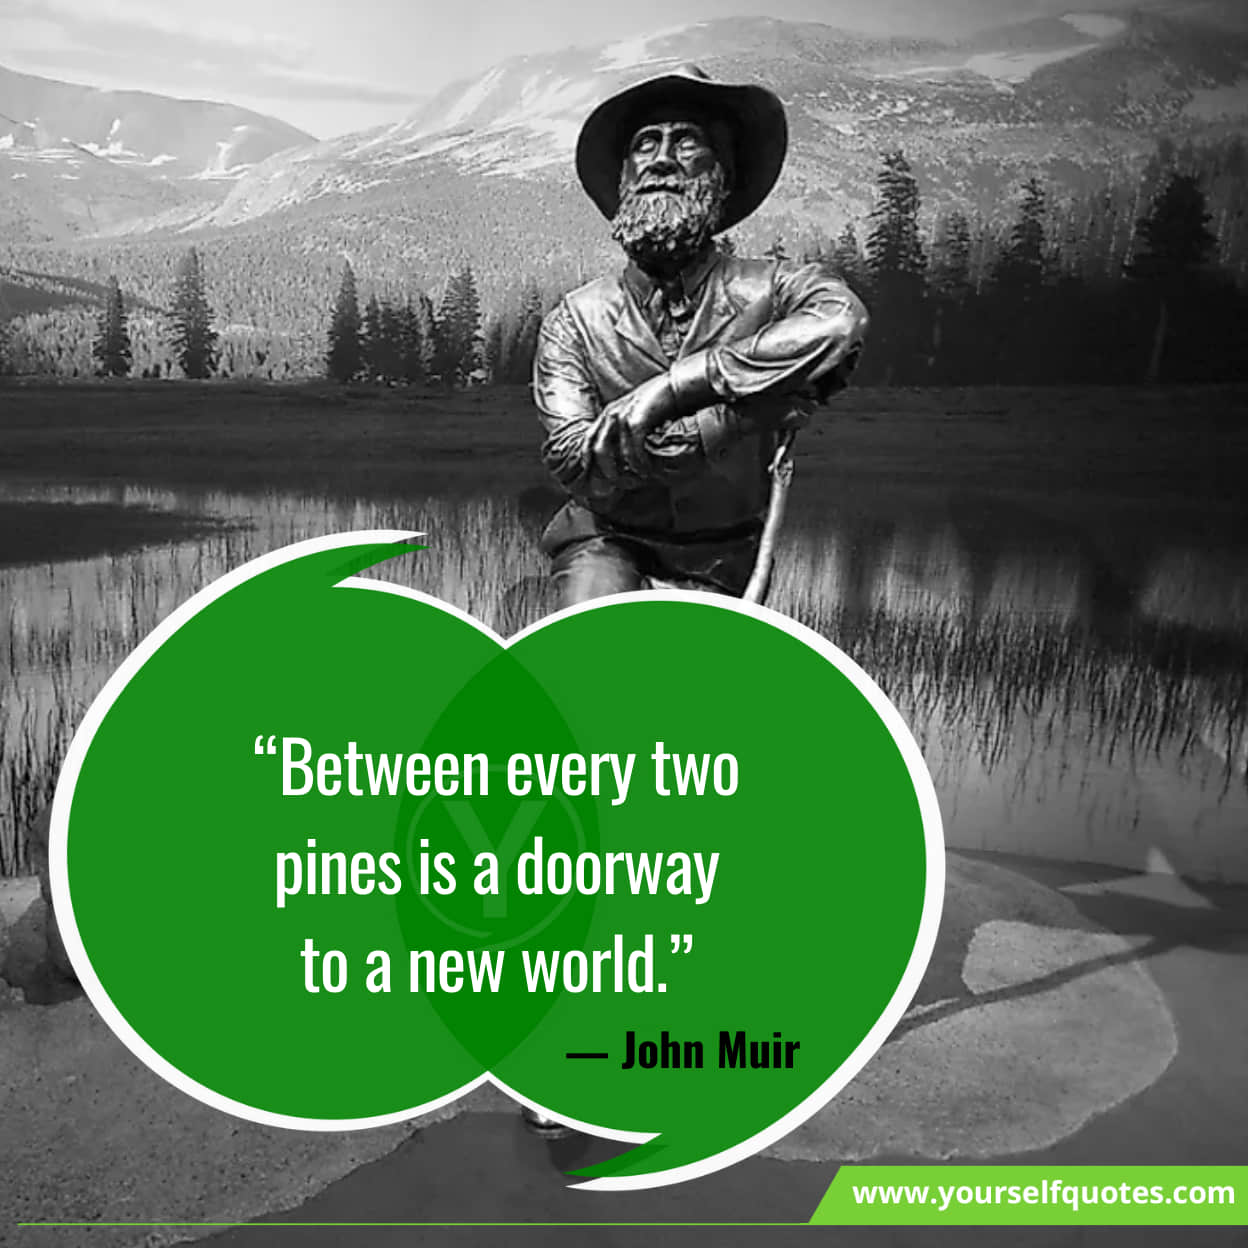 Inspirational Quotes by John Muir